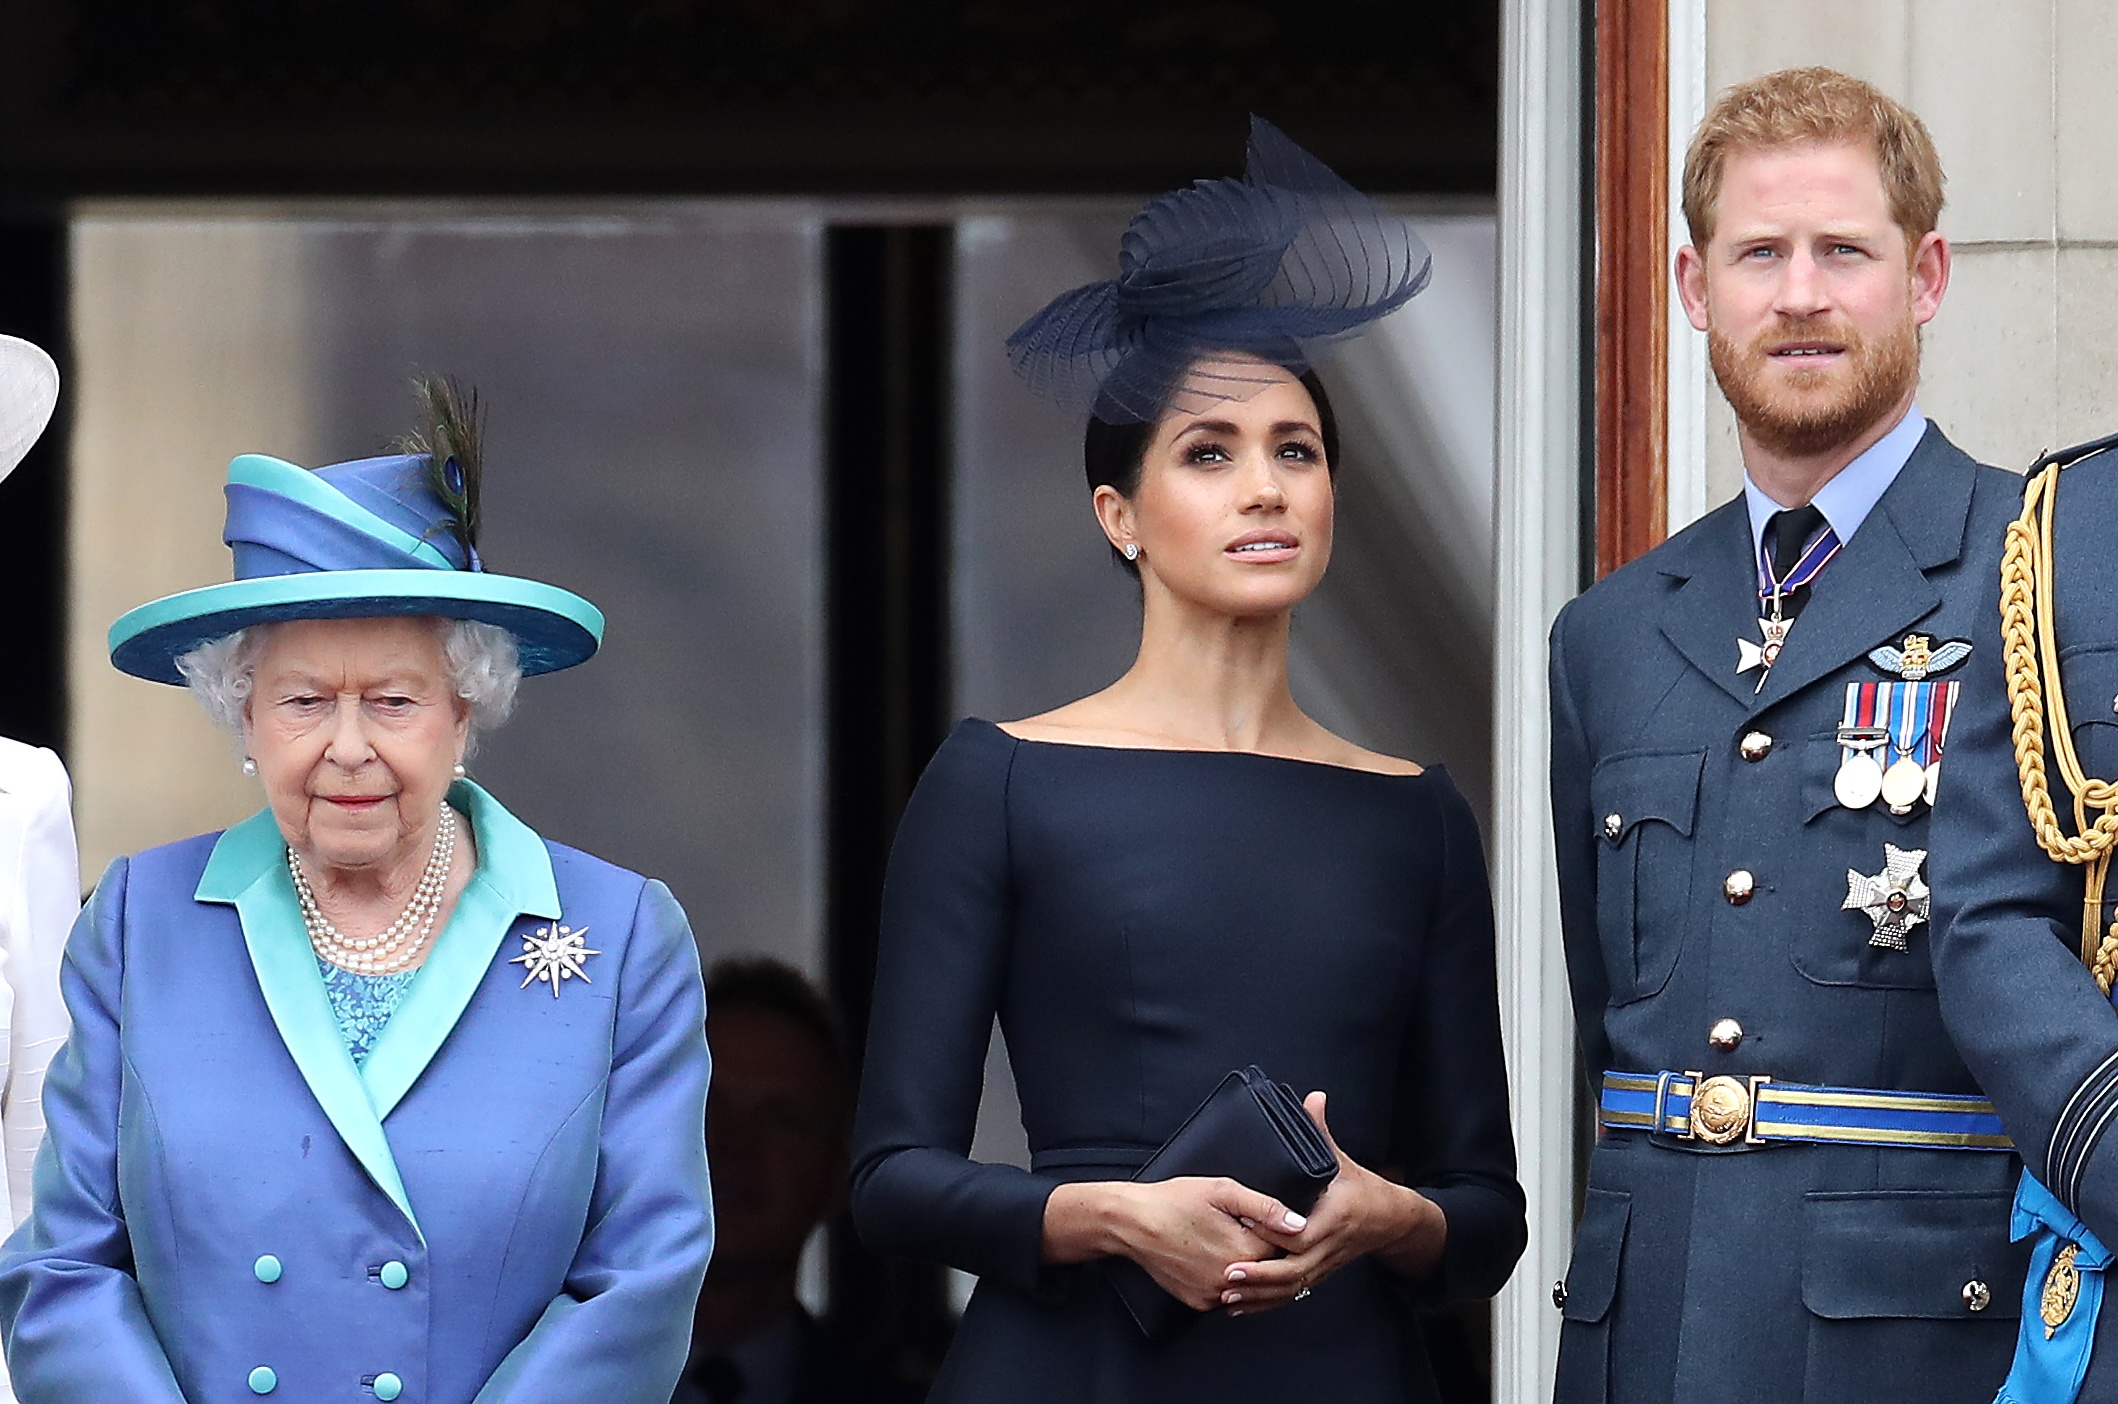 Queen Elizabeth II, Meghan Markle, and Prince Harry at Buckingham Palace as the Royal family attend events to mark the Centenary of the RAF on July 10, 2018 in London, England | Source: Getty Images